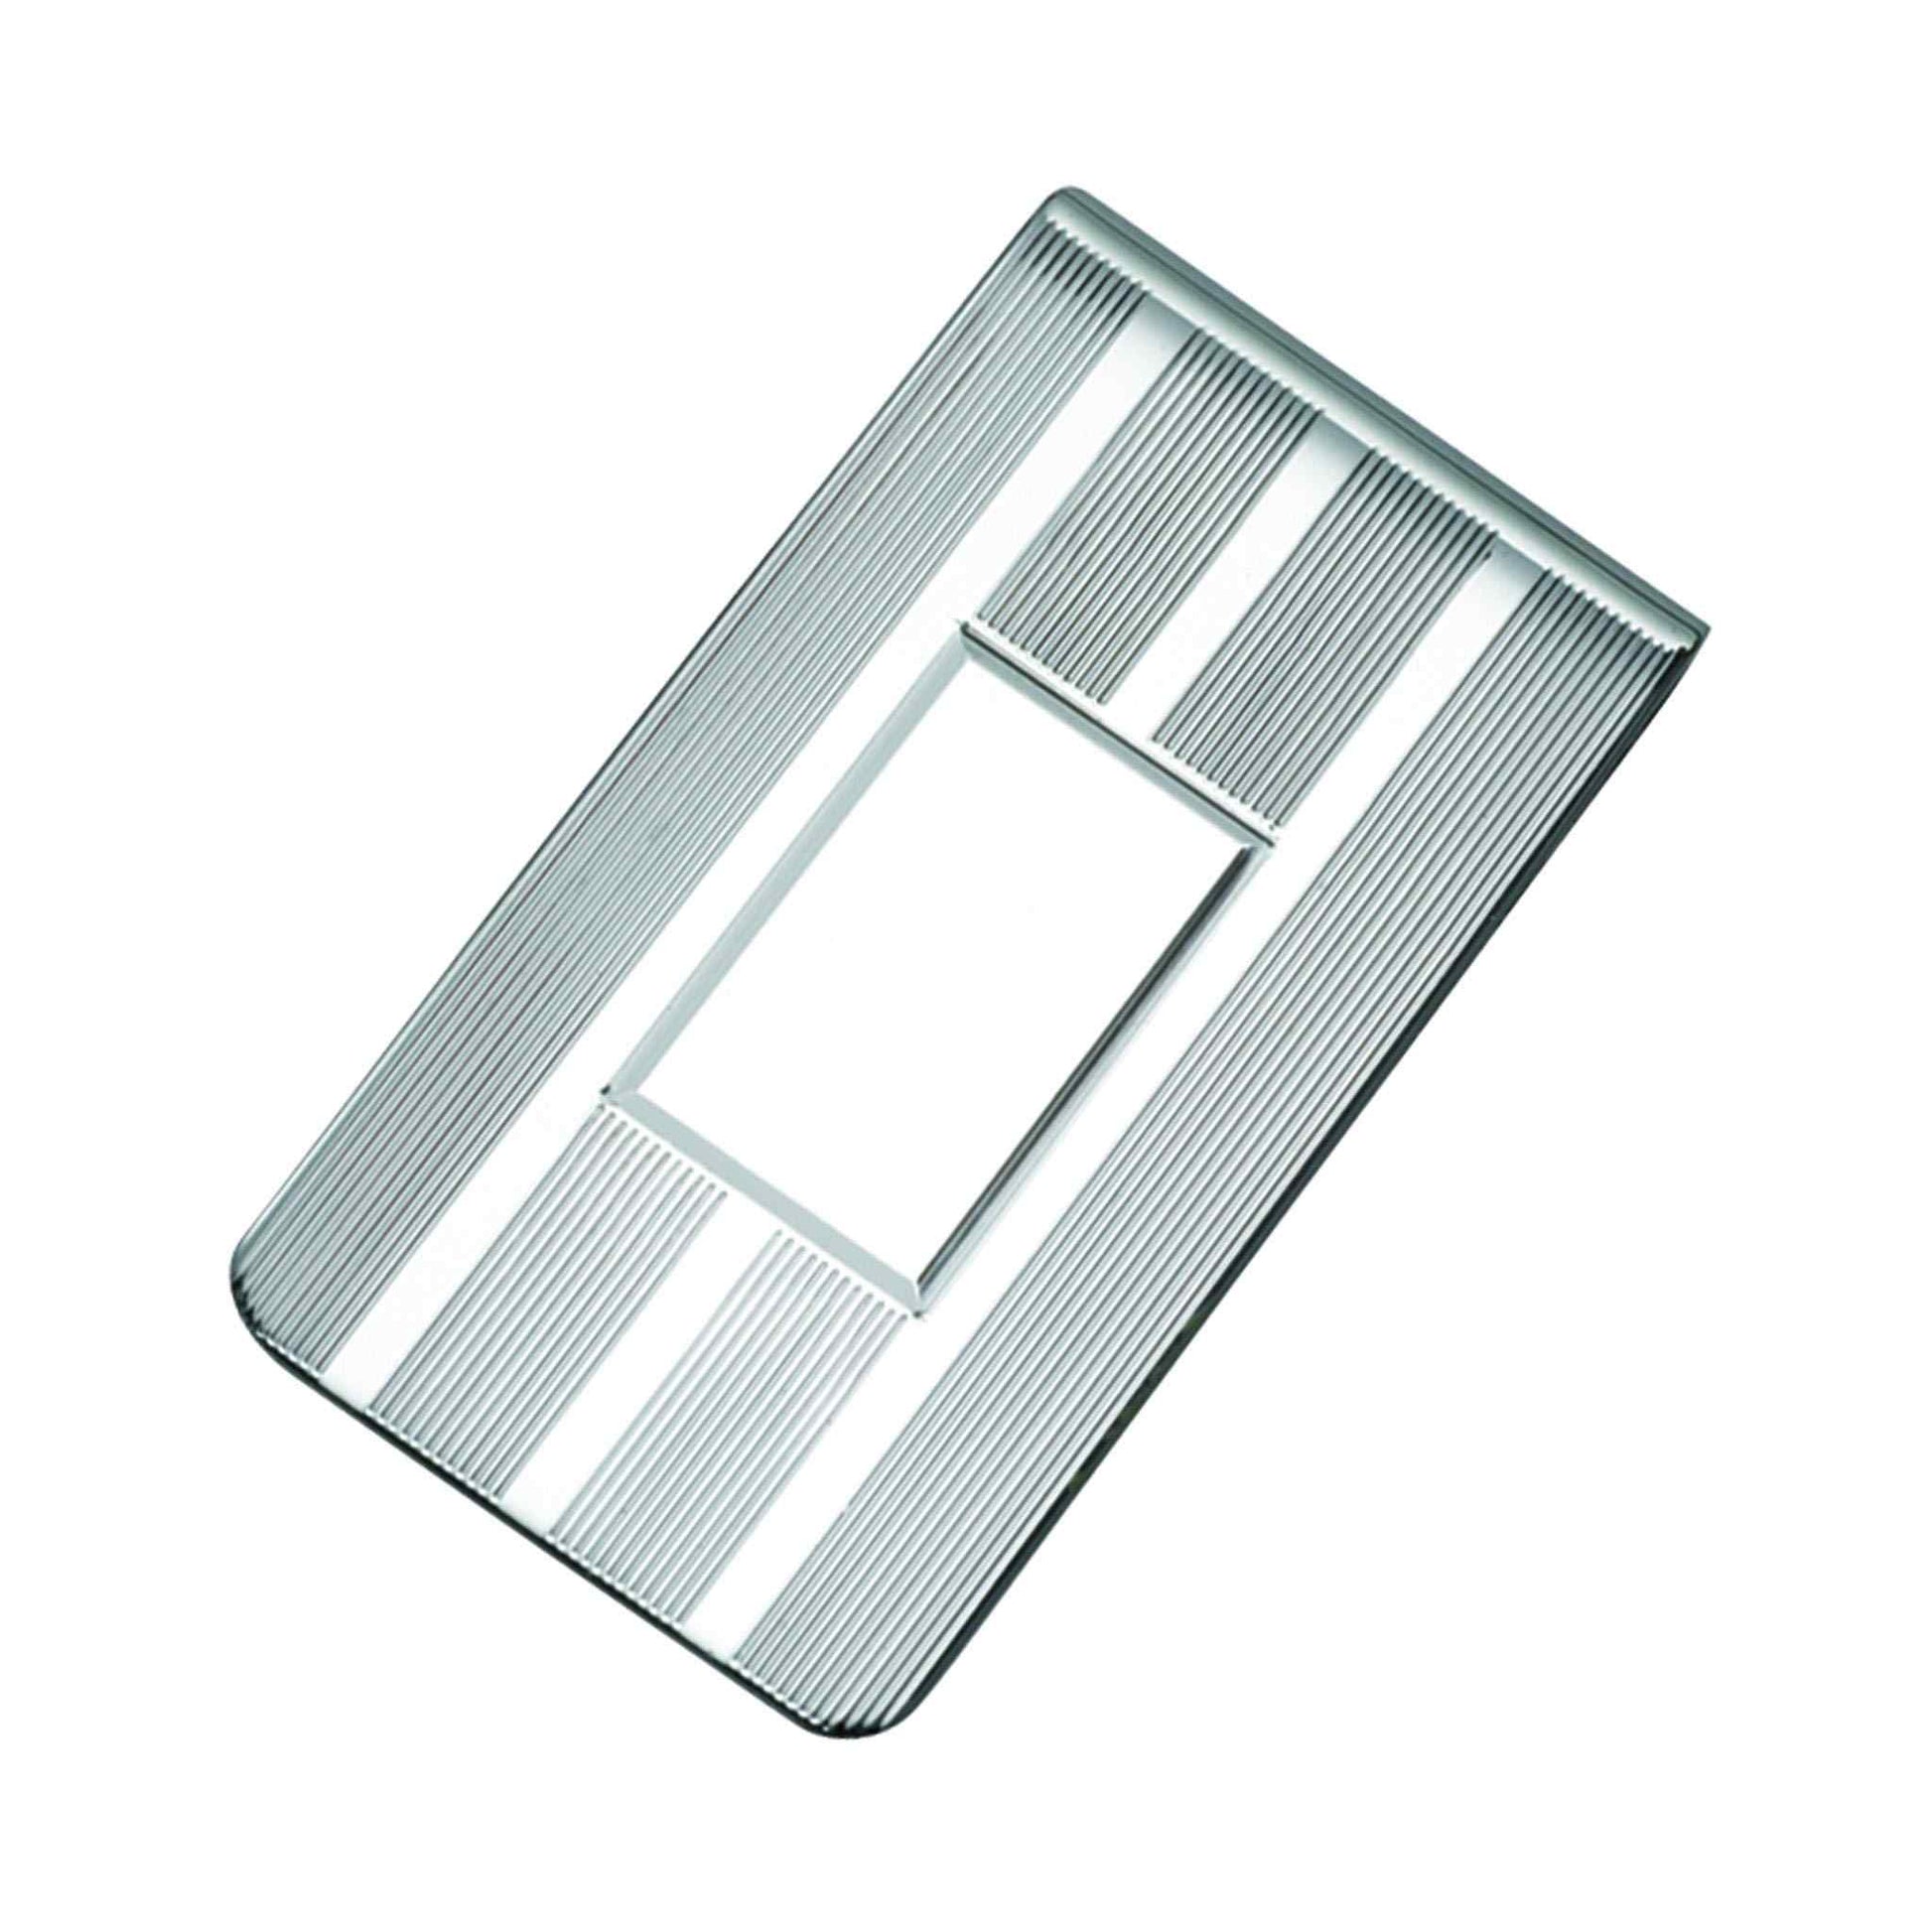 A 1" sterling silver money clip engine-turned displayed on a neutral white background.